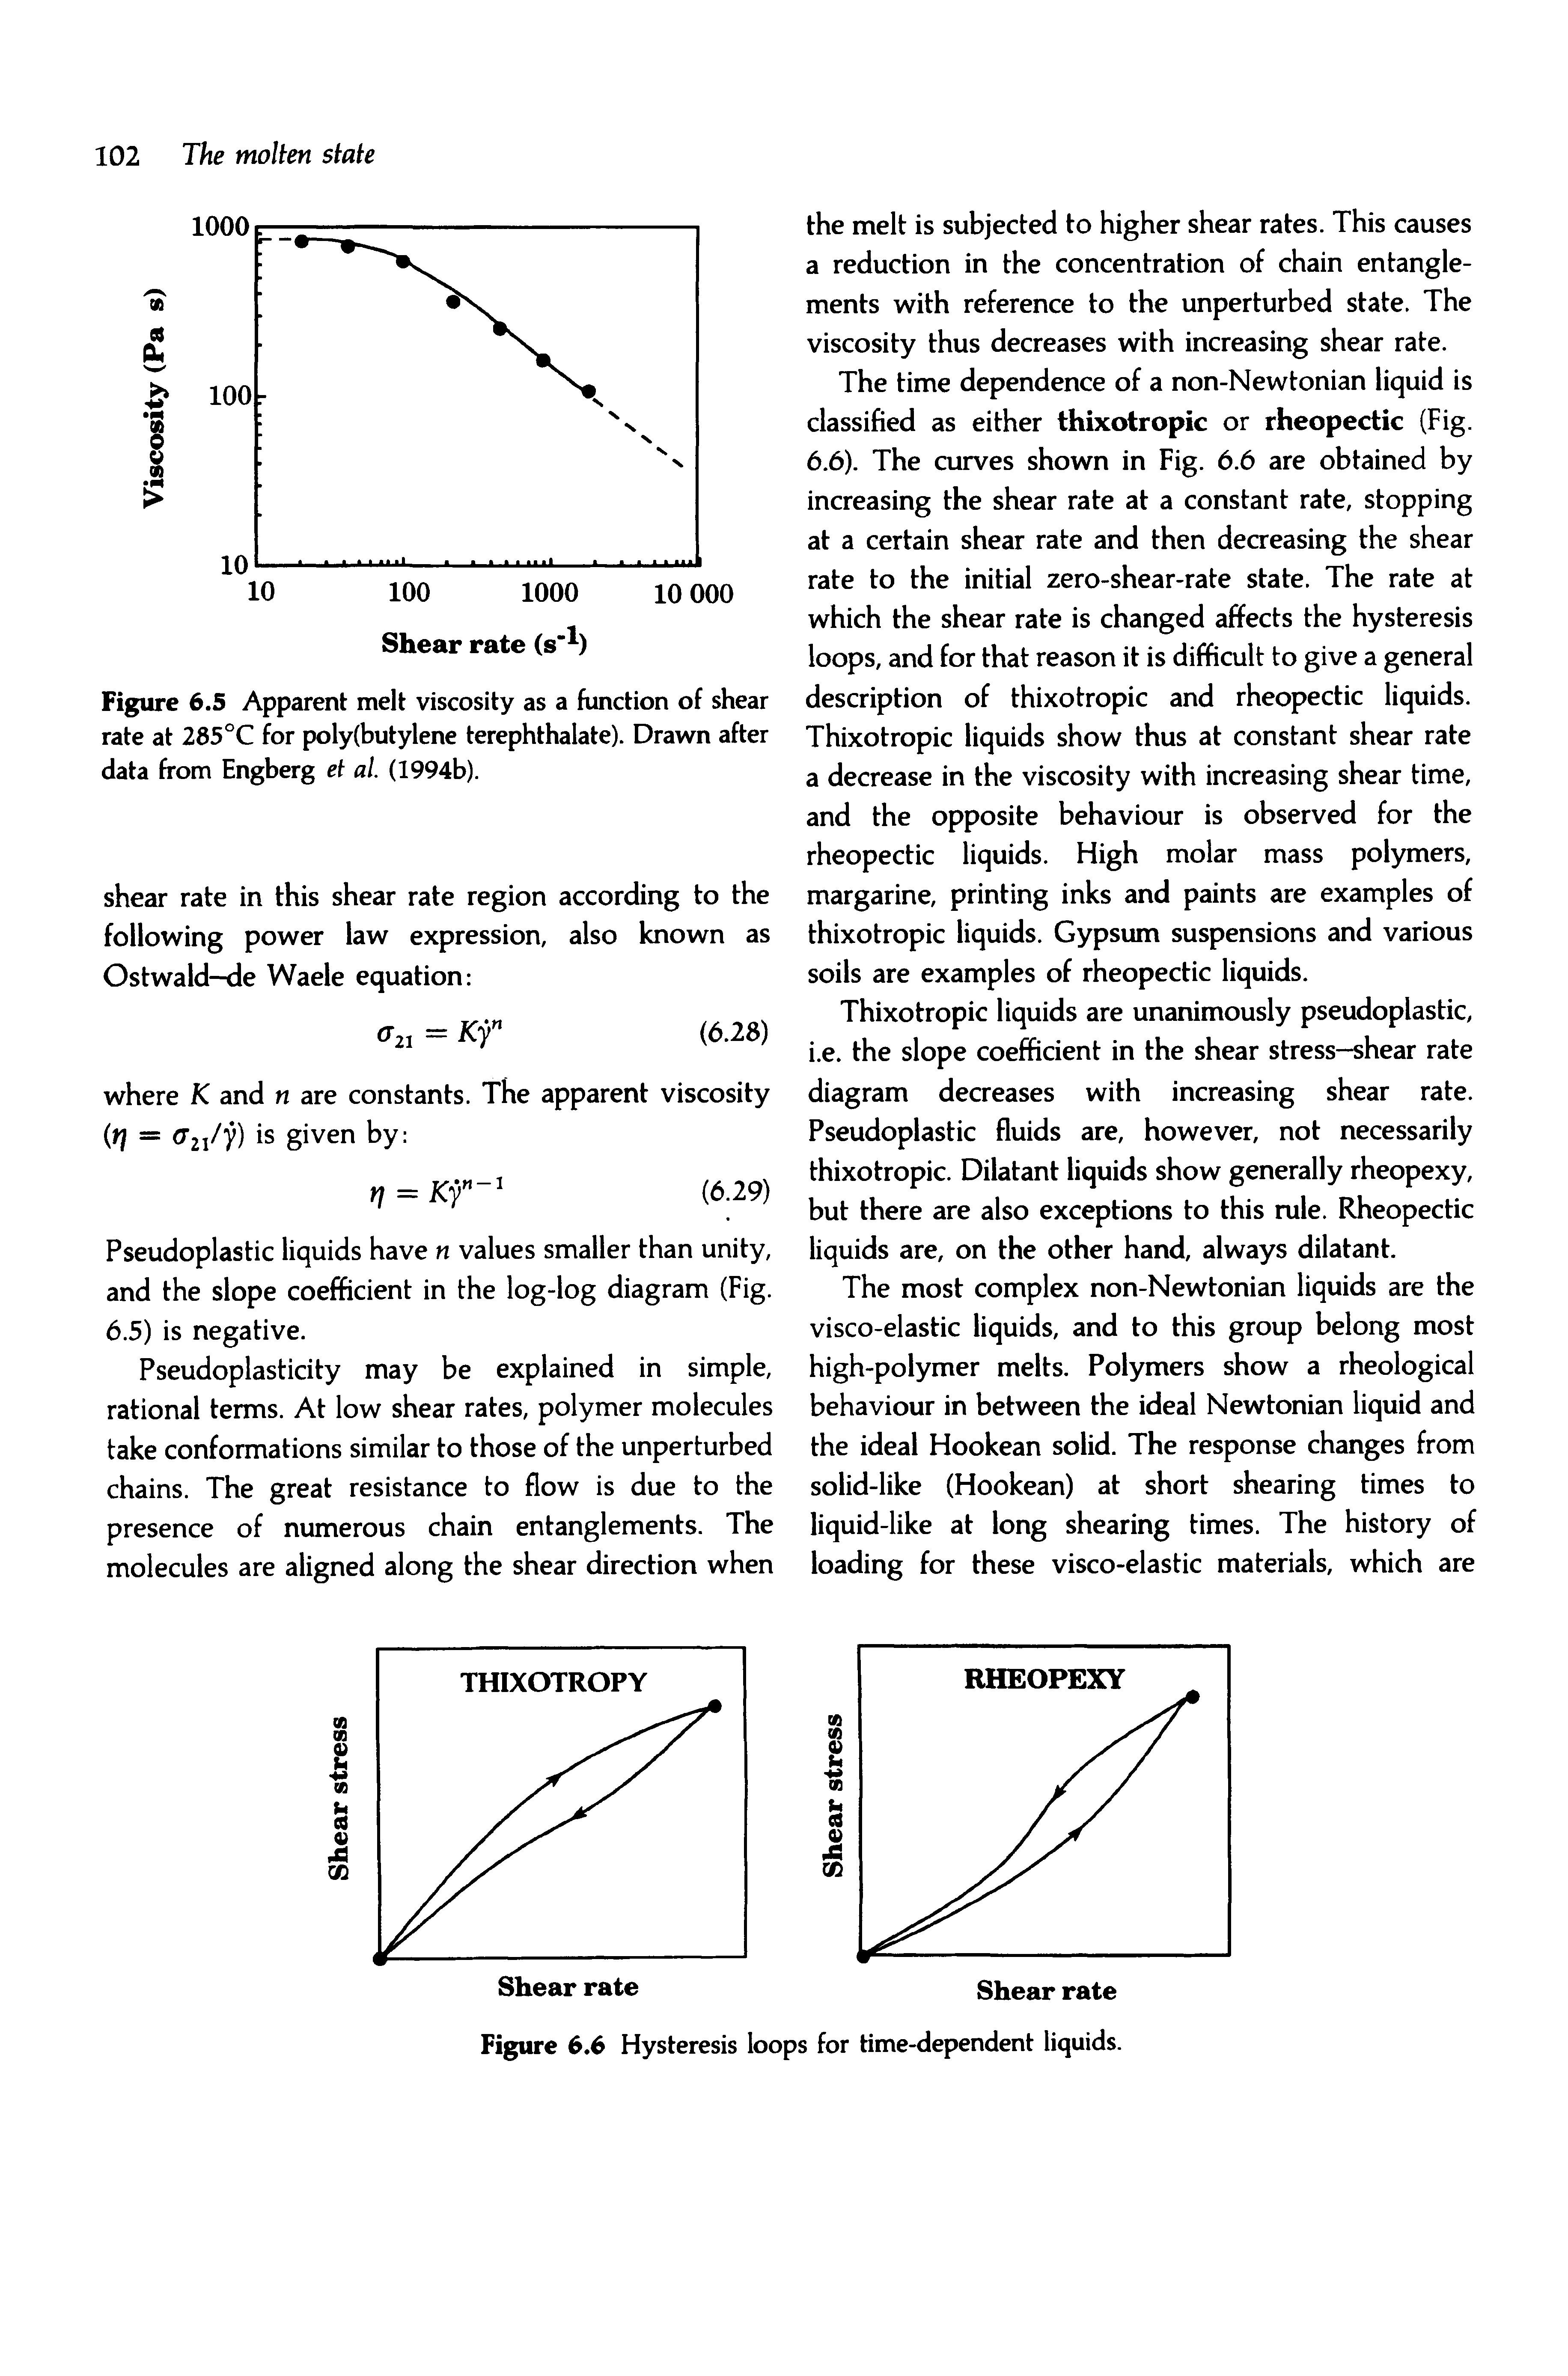 Figure 6.5 Apparent melt viscosity as a function of shear rate at 285°C for poly(butylene terephthalate). Drawn after data from Engberg et al (1994b).